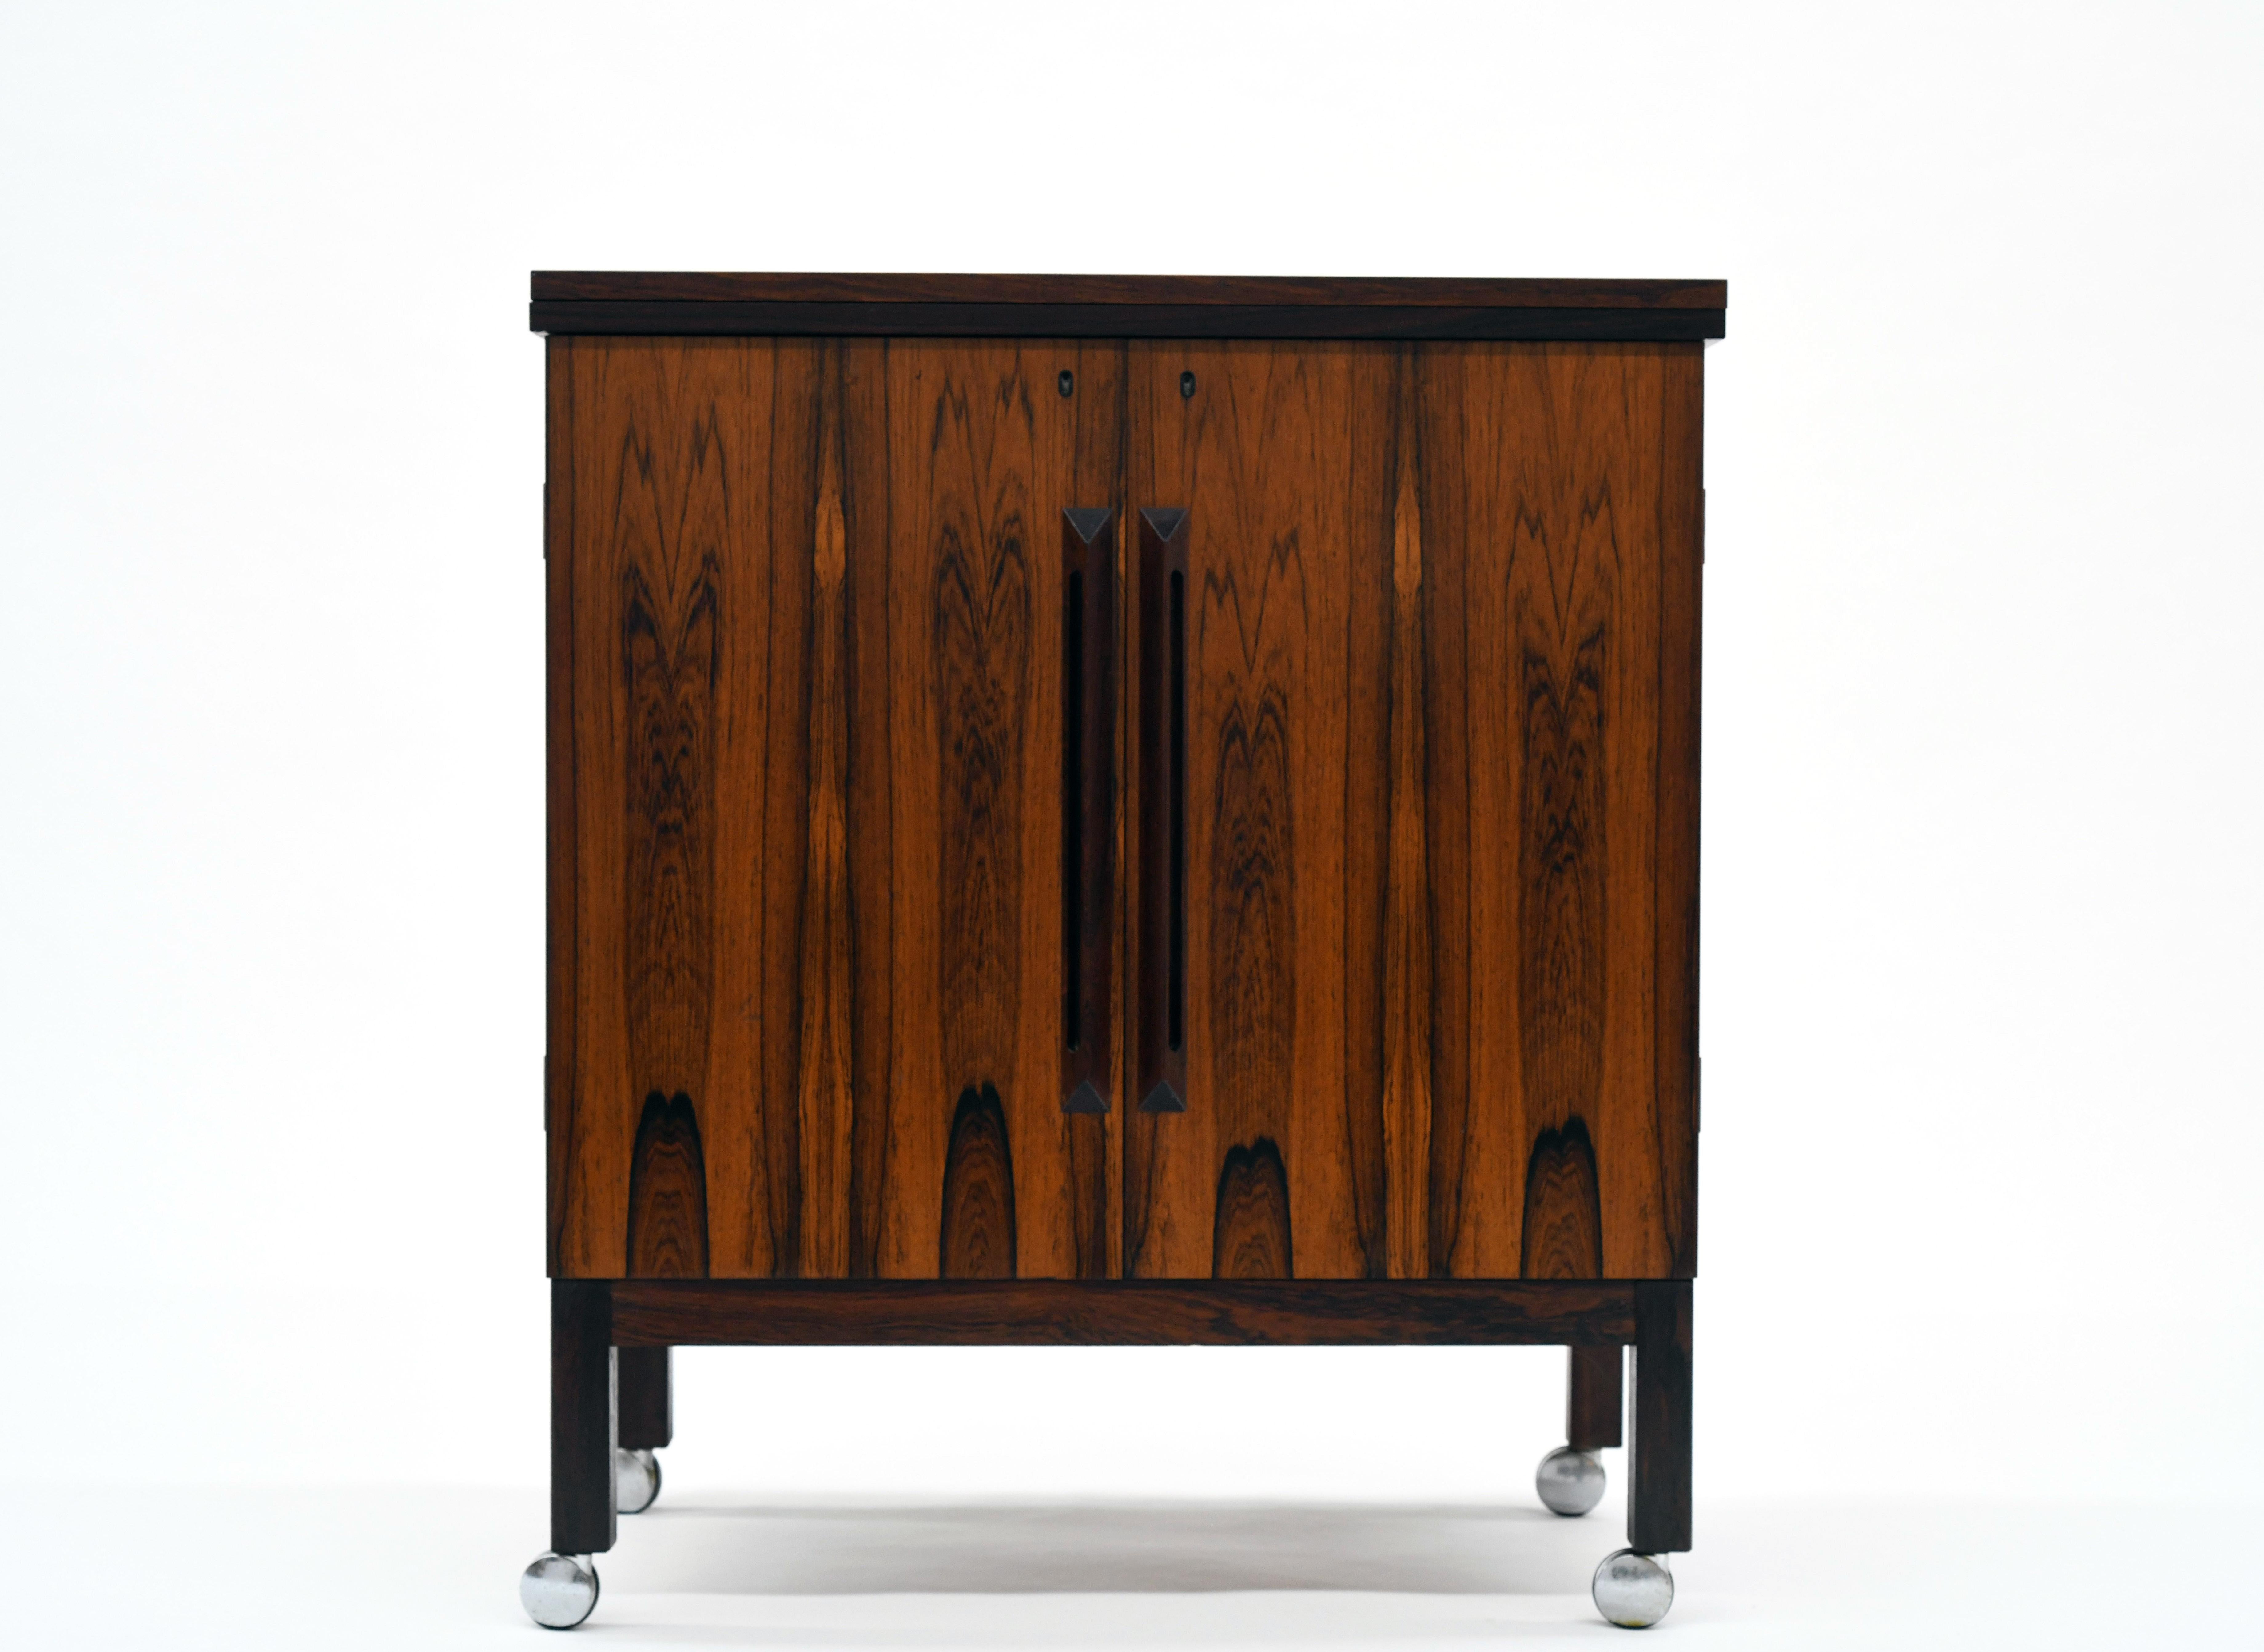 Attractive and functional flip-top bar cabinet in Brazilian rosewood. High quality construction throughout. Locking cabinet opens to reveal storage for all necessary bar accoutrements. Black laminate flip-top measures 60.5 W x 16.25 D x 34.75 H when